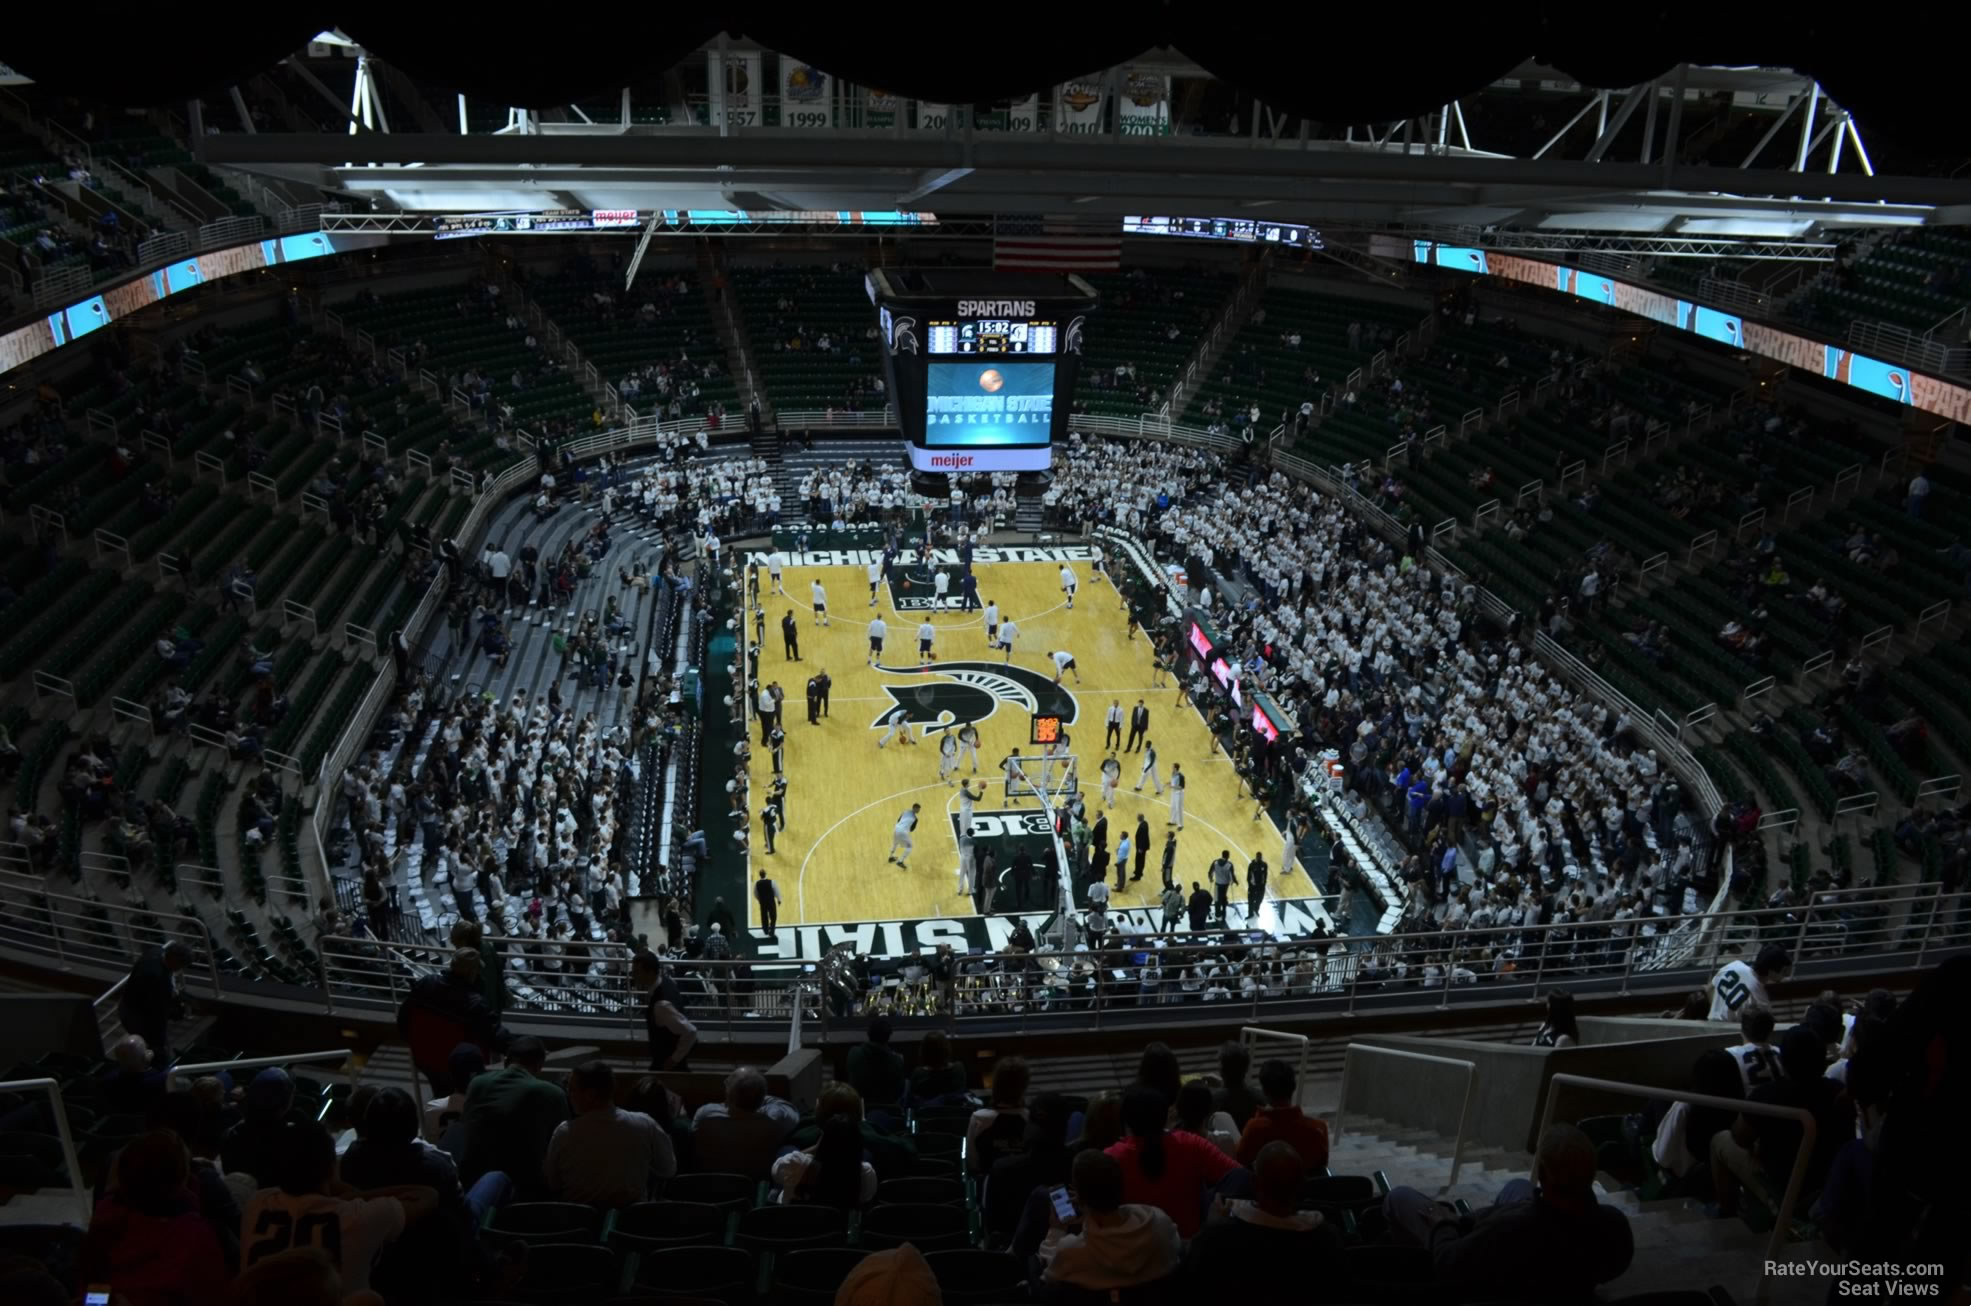 section 219, row 15 seat view  - breslin center